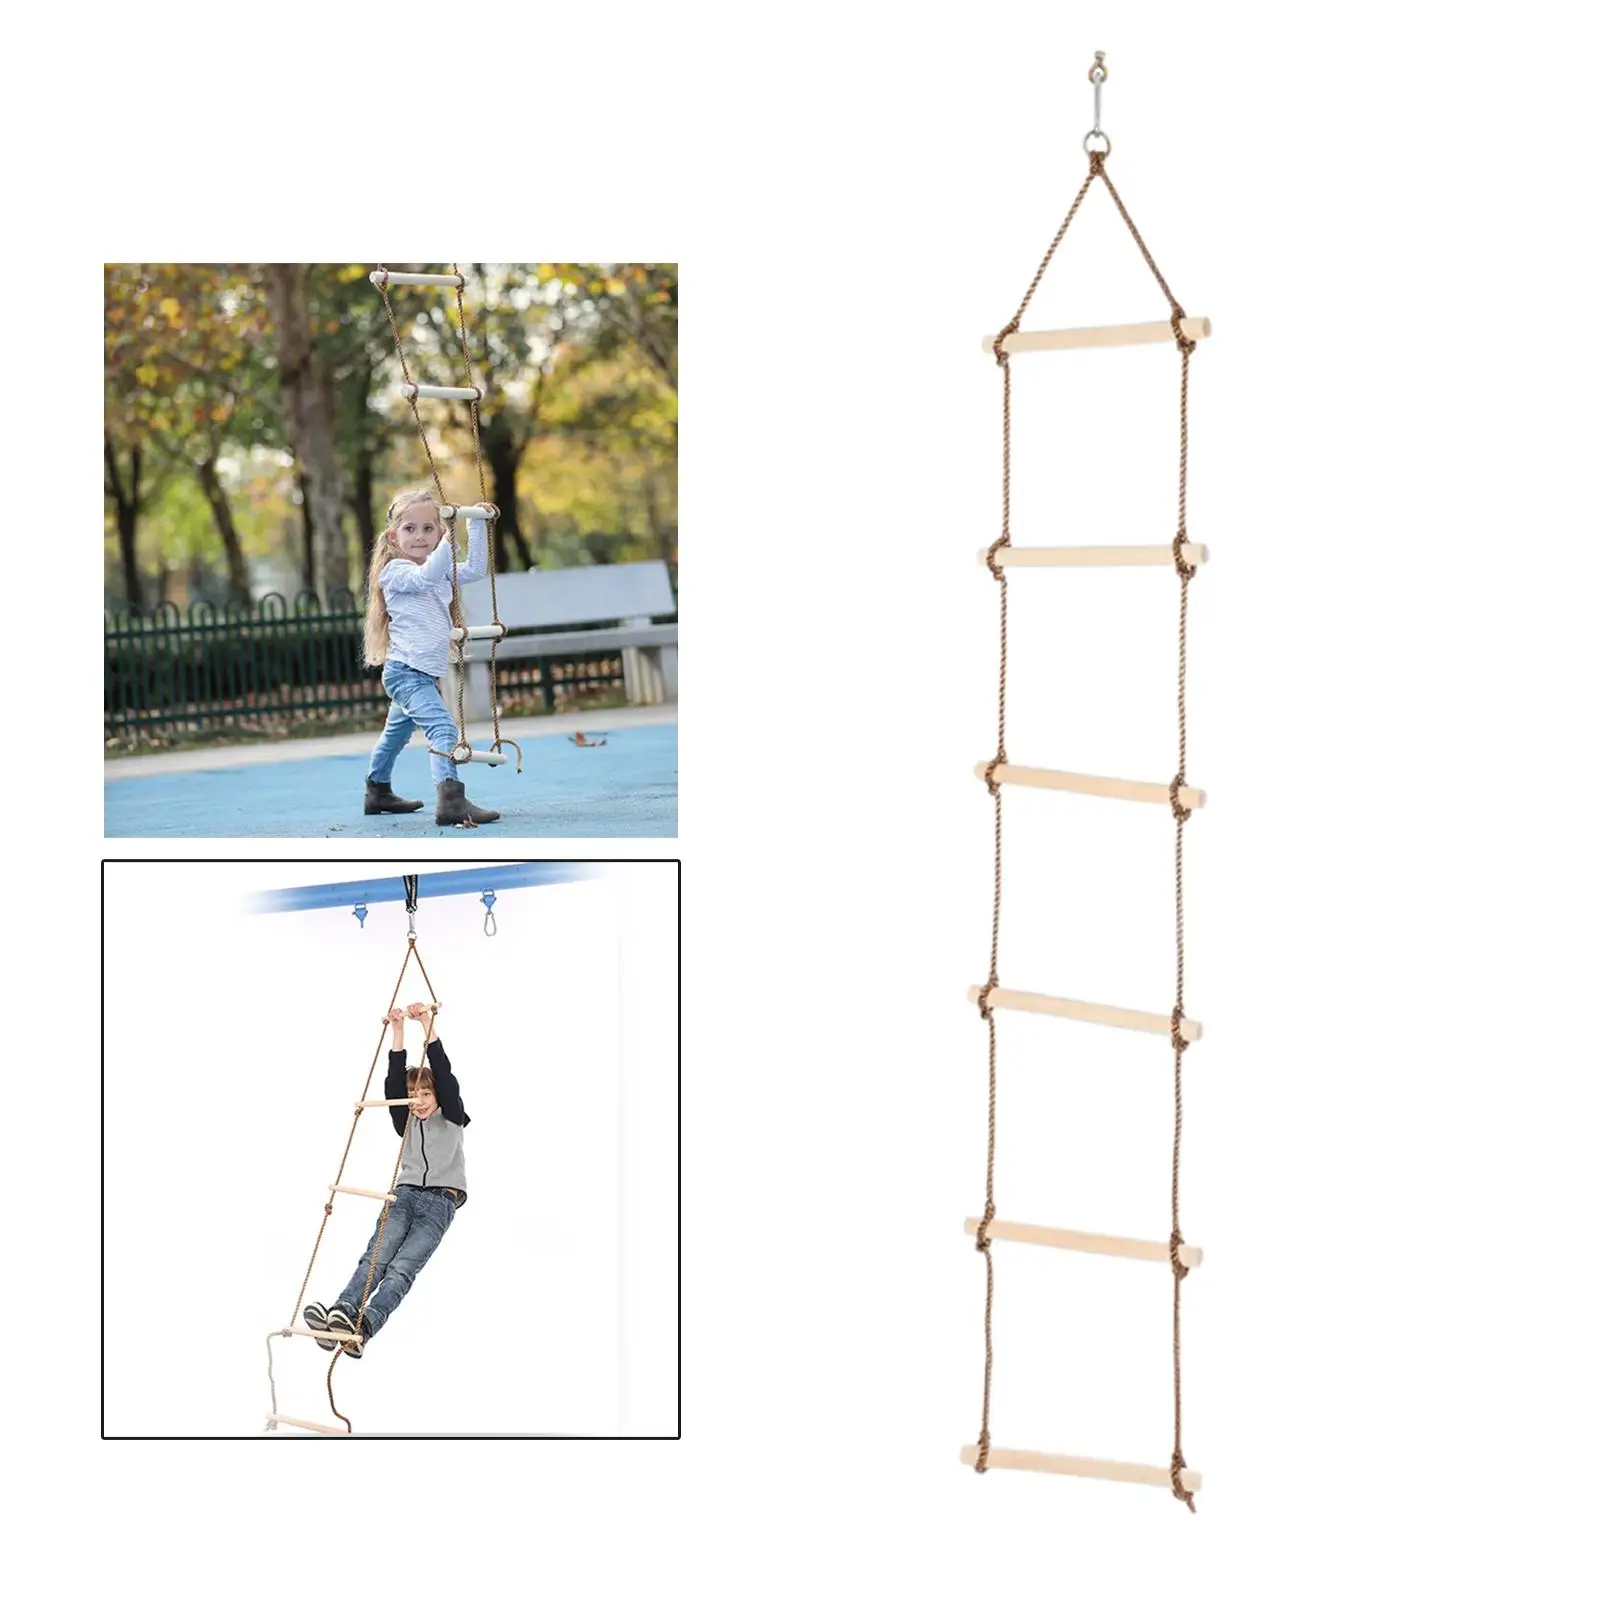 Climbing Rope Ladder Swivel Accessories Tools for Outdoor Garden Playground